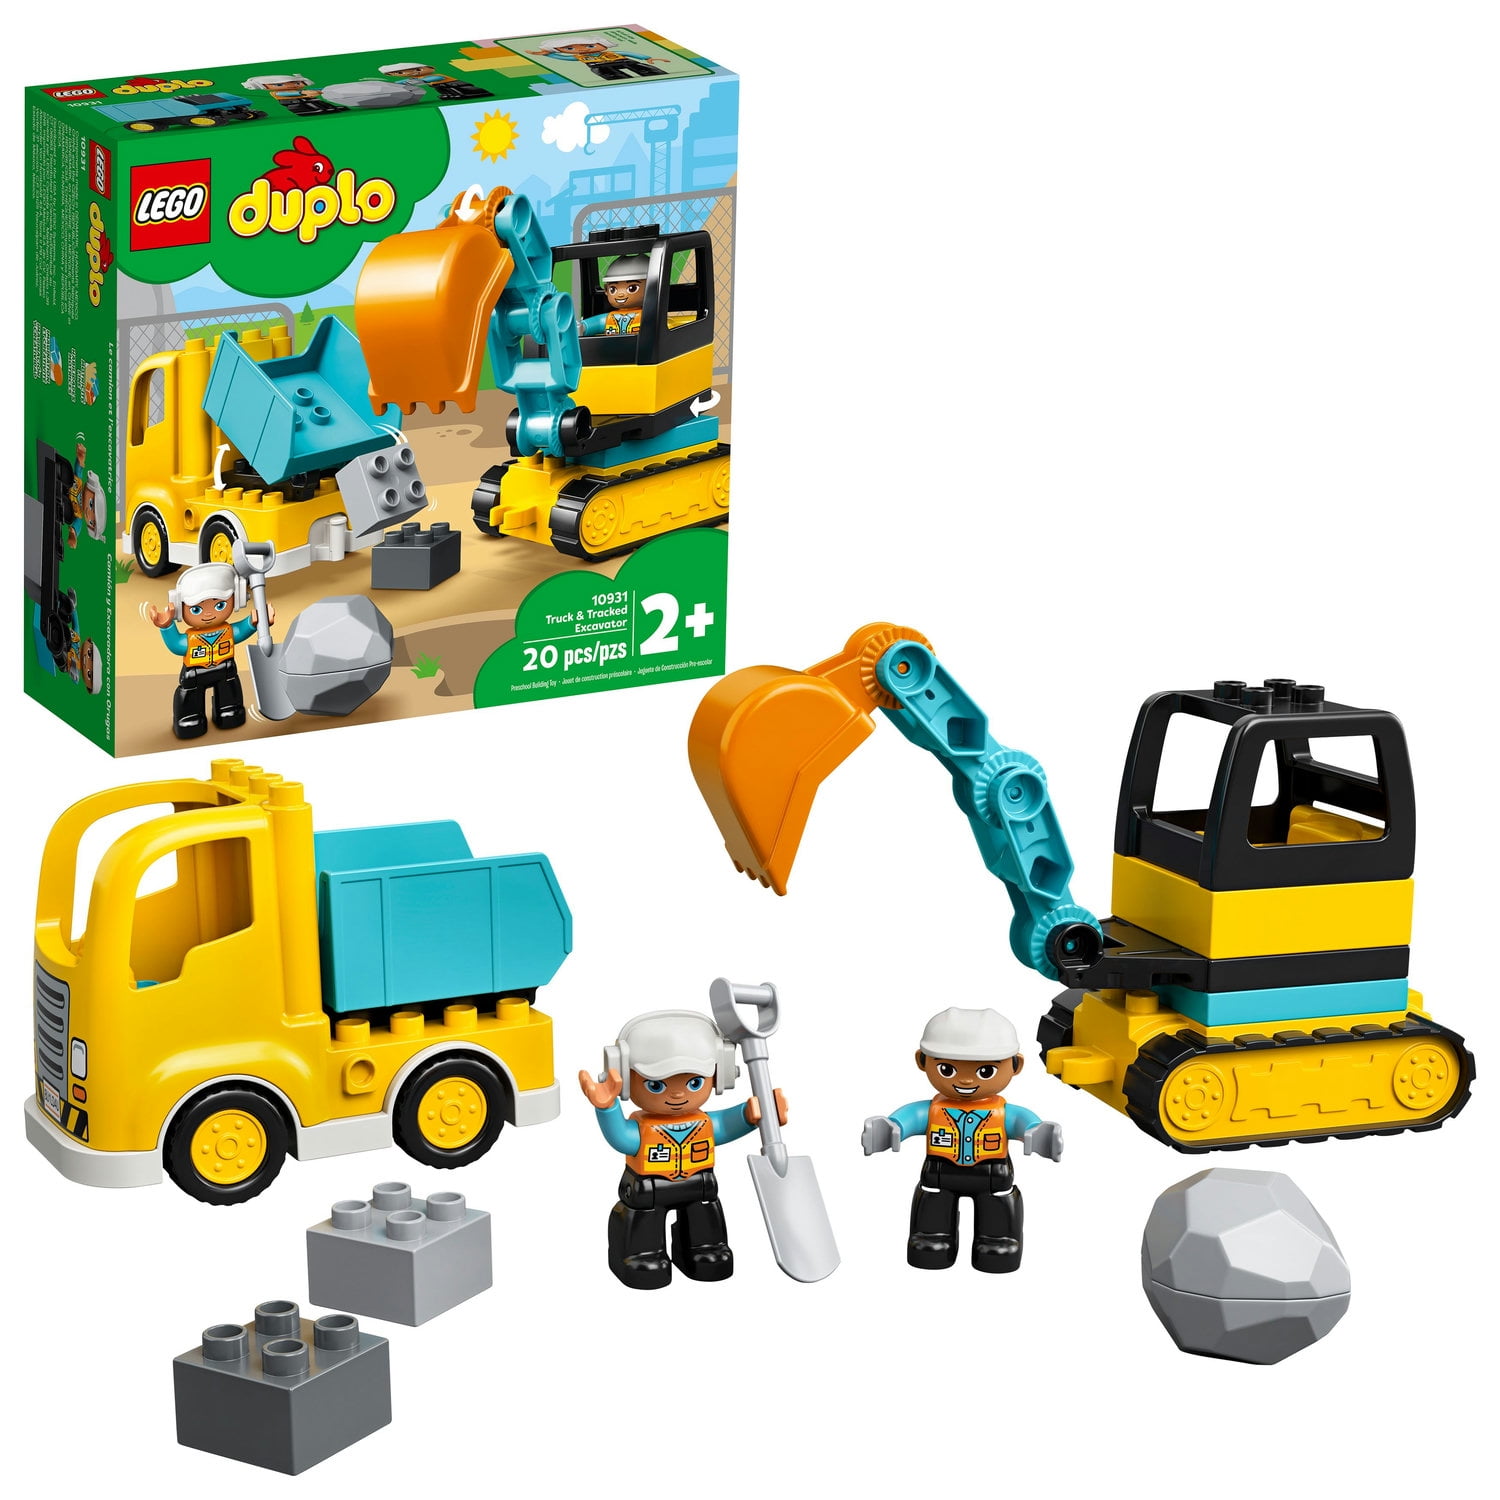 Tonka Mighty Builders Construction Figure Playset 12pcs 33513 a for sale online 